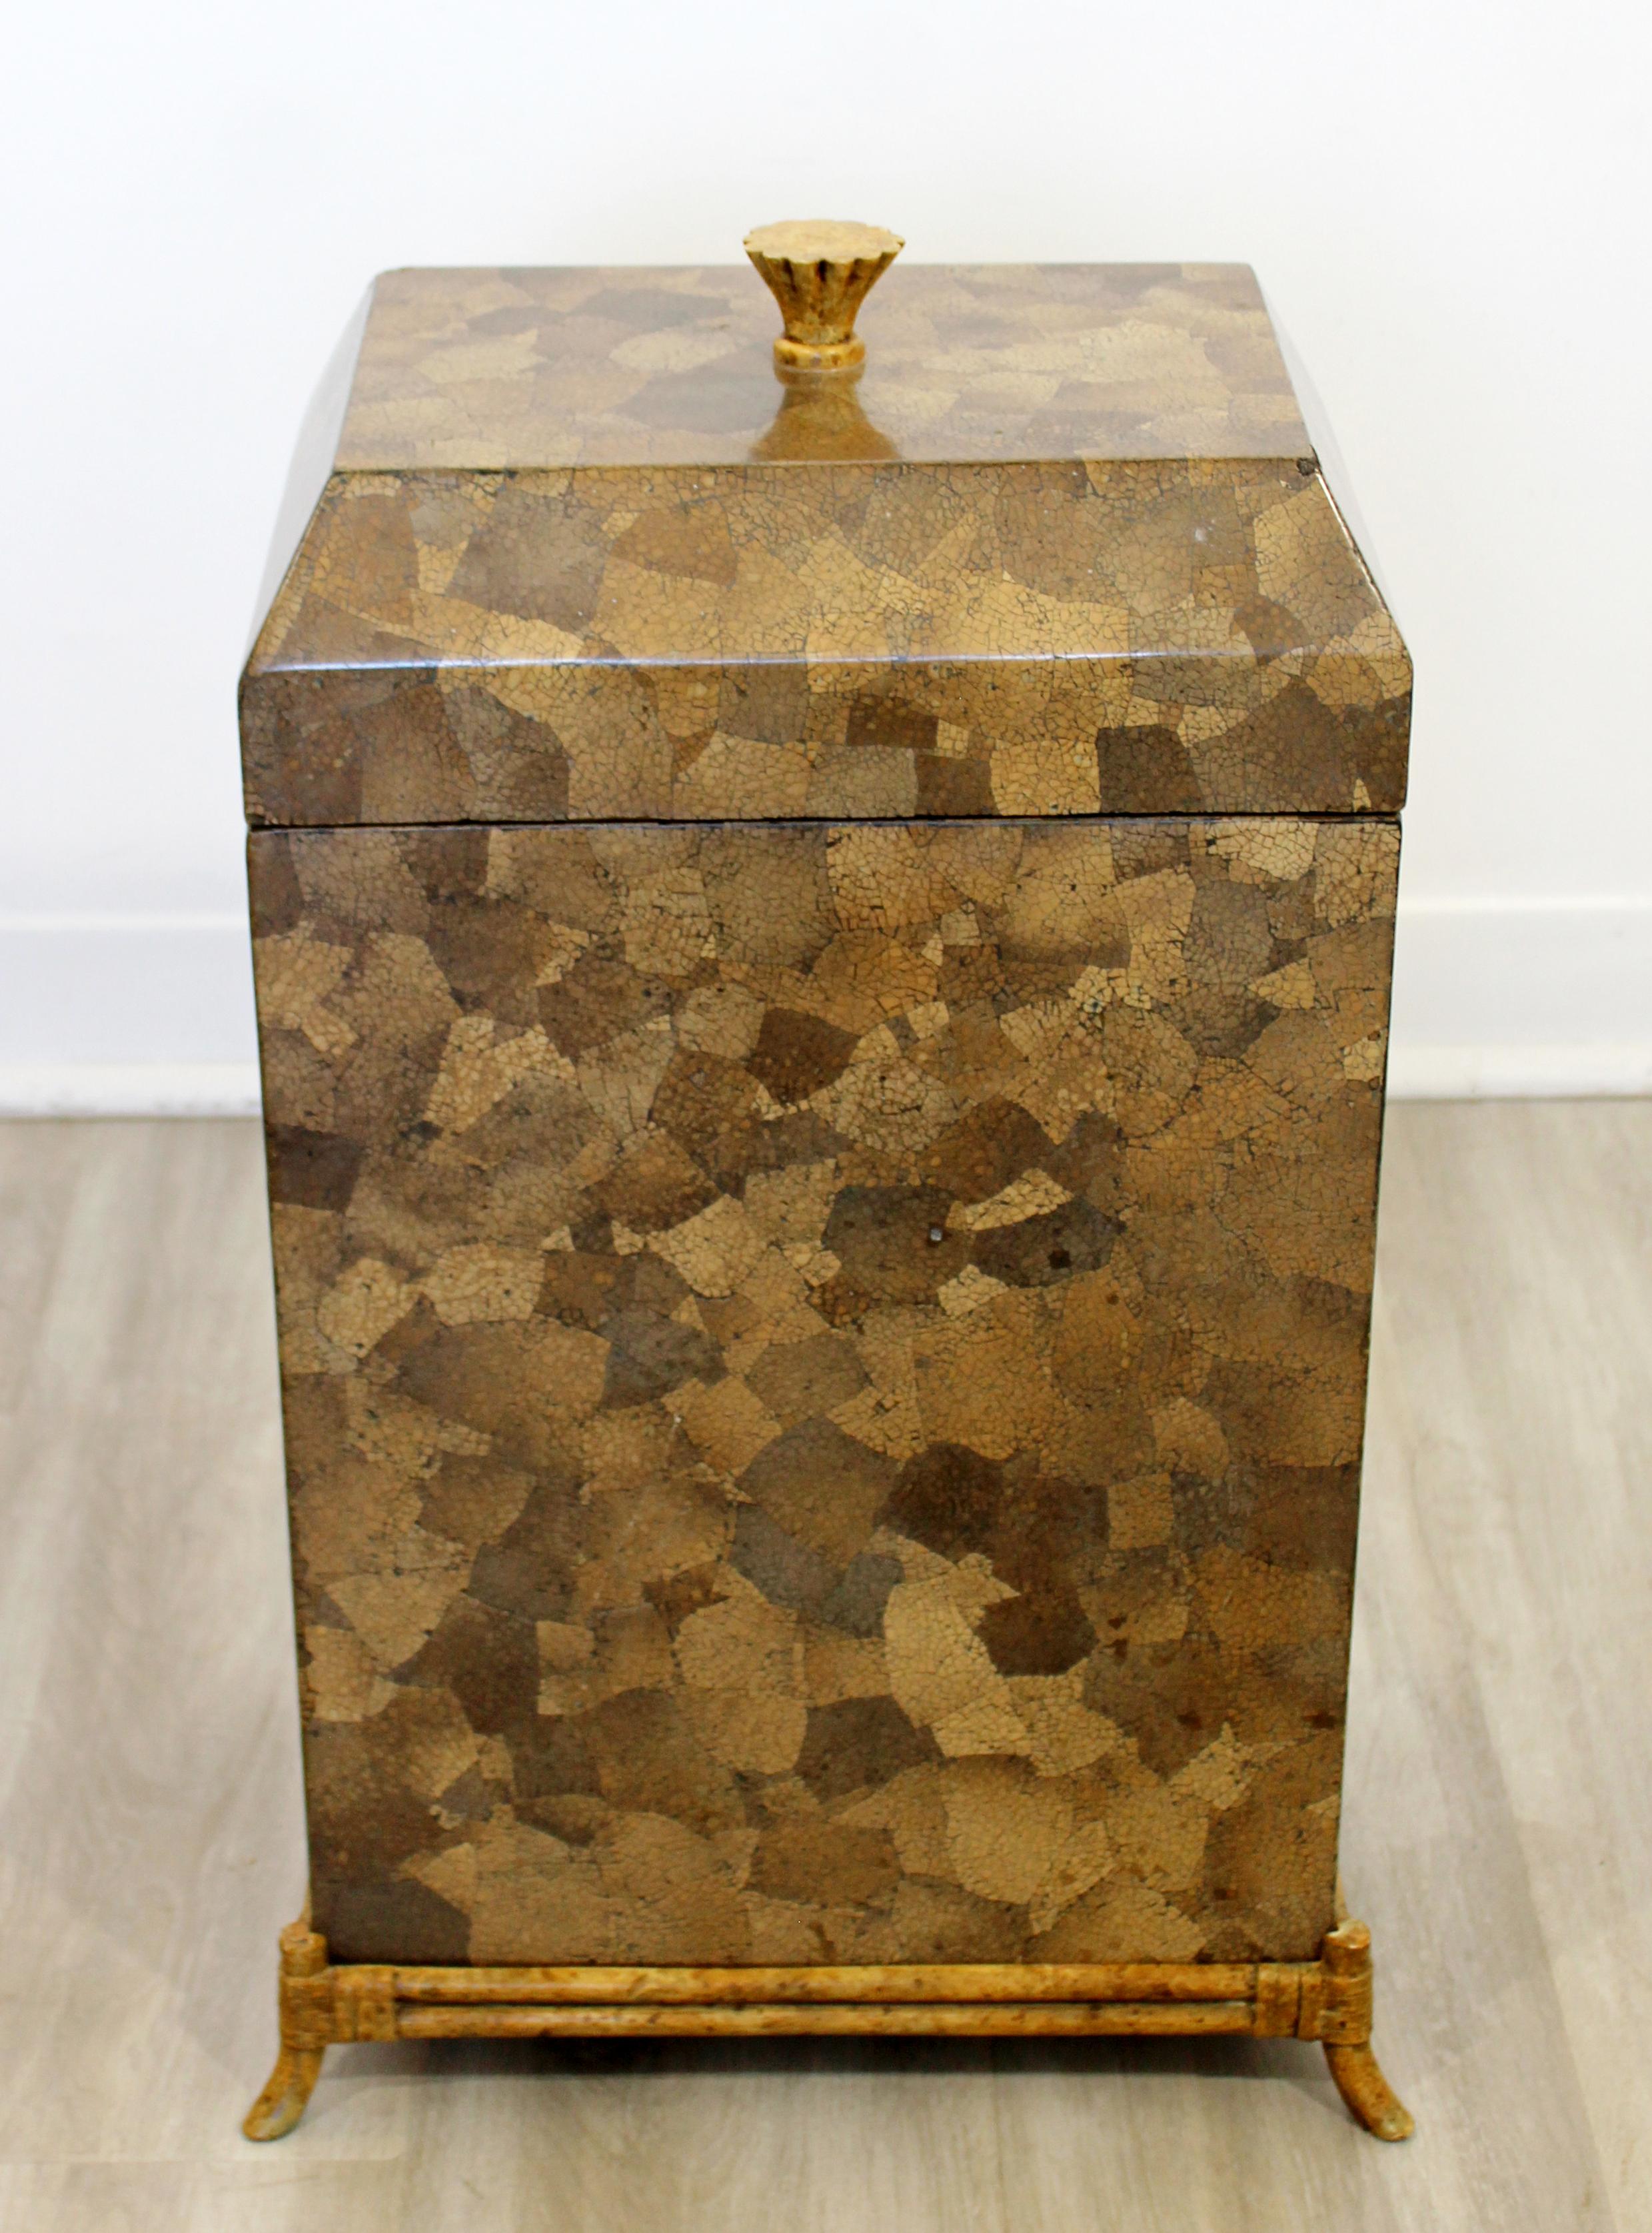 For your consideration is a lux looking, lidded chest or trinket box, made of tessellated stone over wood, by Maitland Smith, circa the 1970s. In very good vintage condition, with a few nicks. The dimensions are 14.5